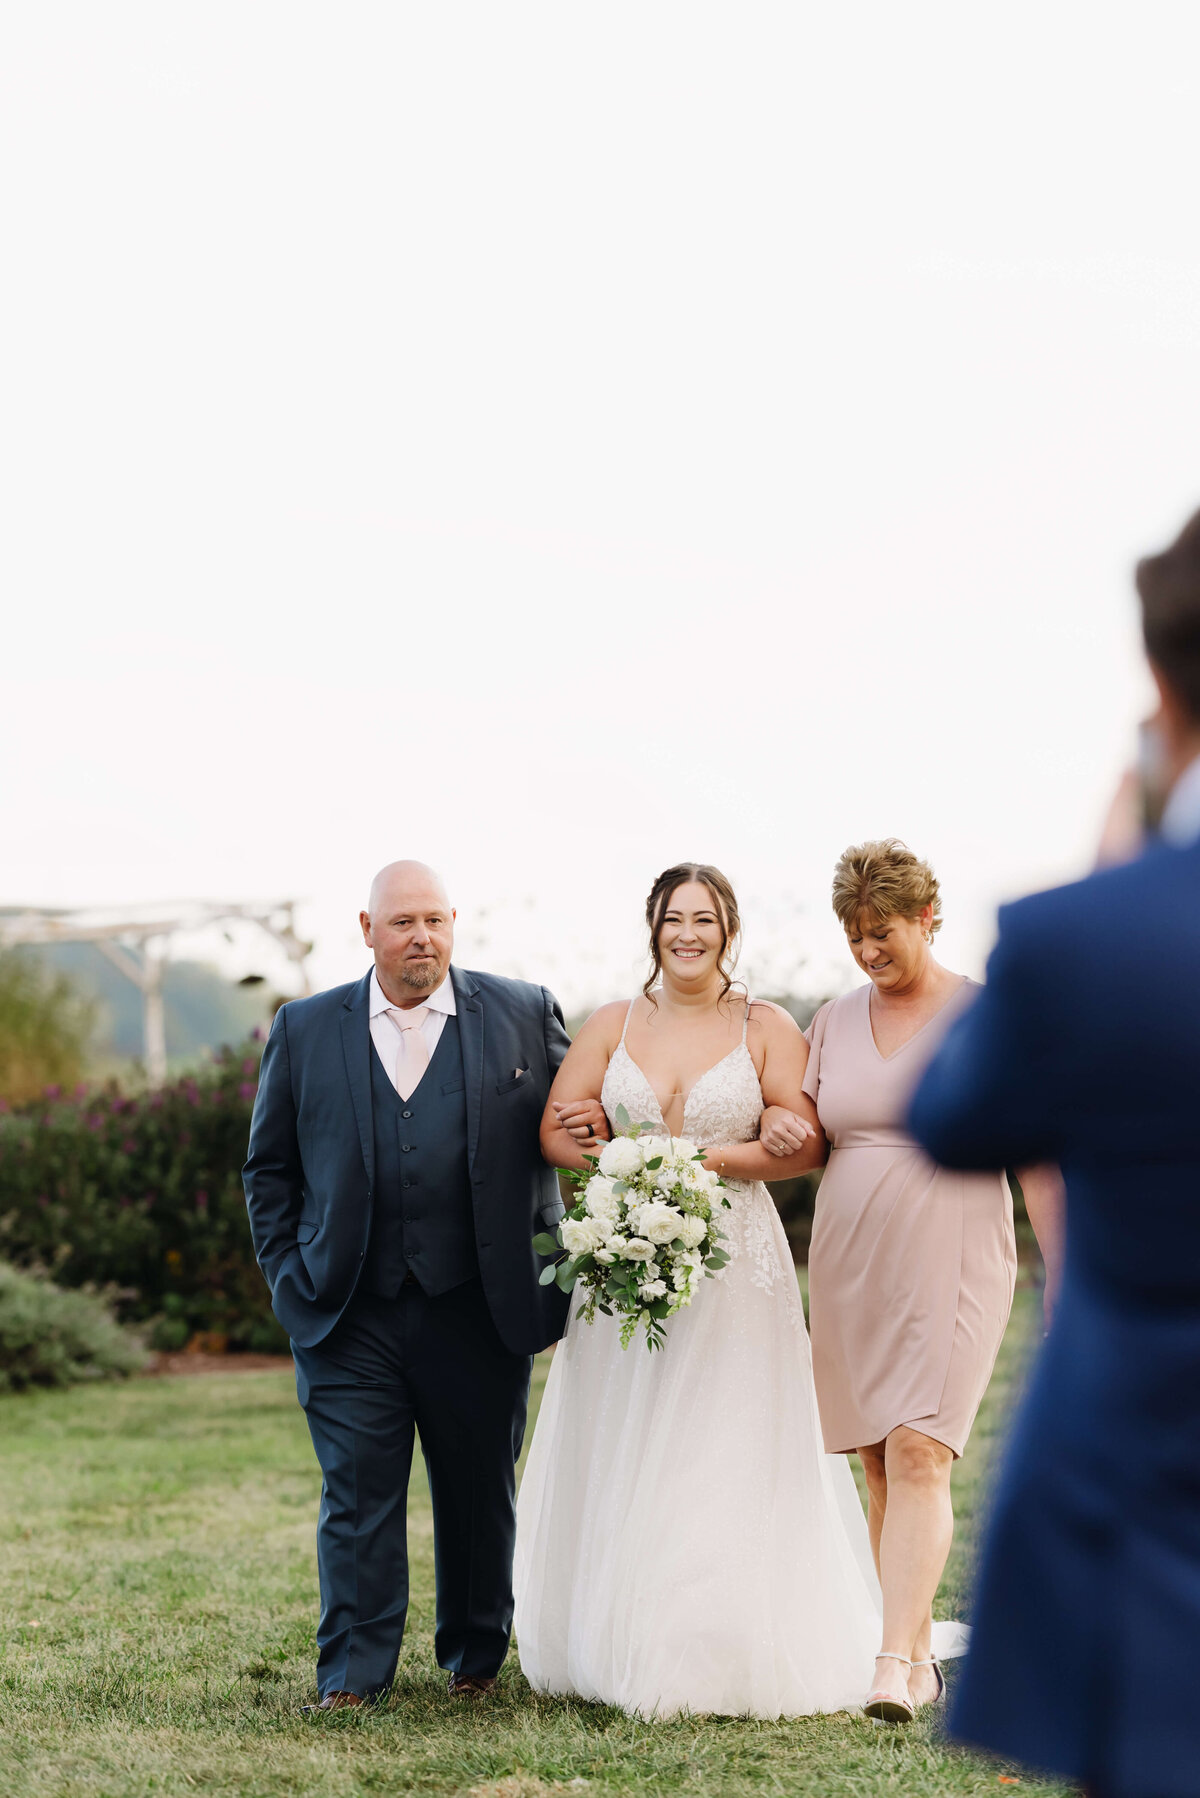 Charlottesville wedding photographer captures bride being walked down the aisle with her parents escorting her for her outdoor ceremony at Sunny Slope Farm